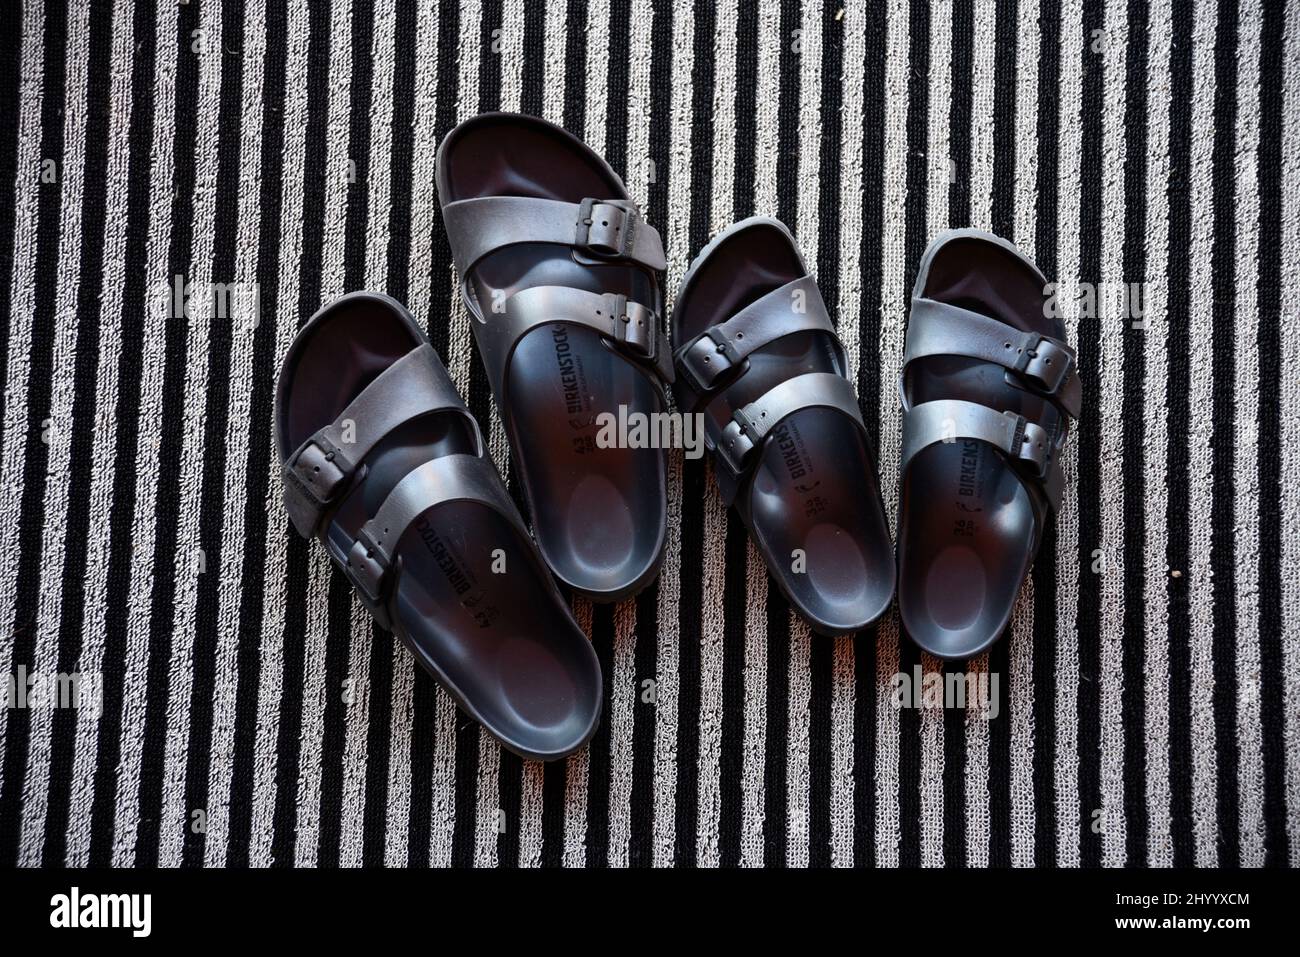 3,210 Birkenstock Photos & High Res Pictures - Getty Images